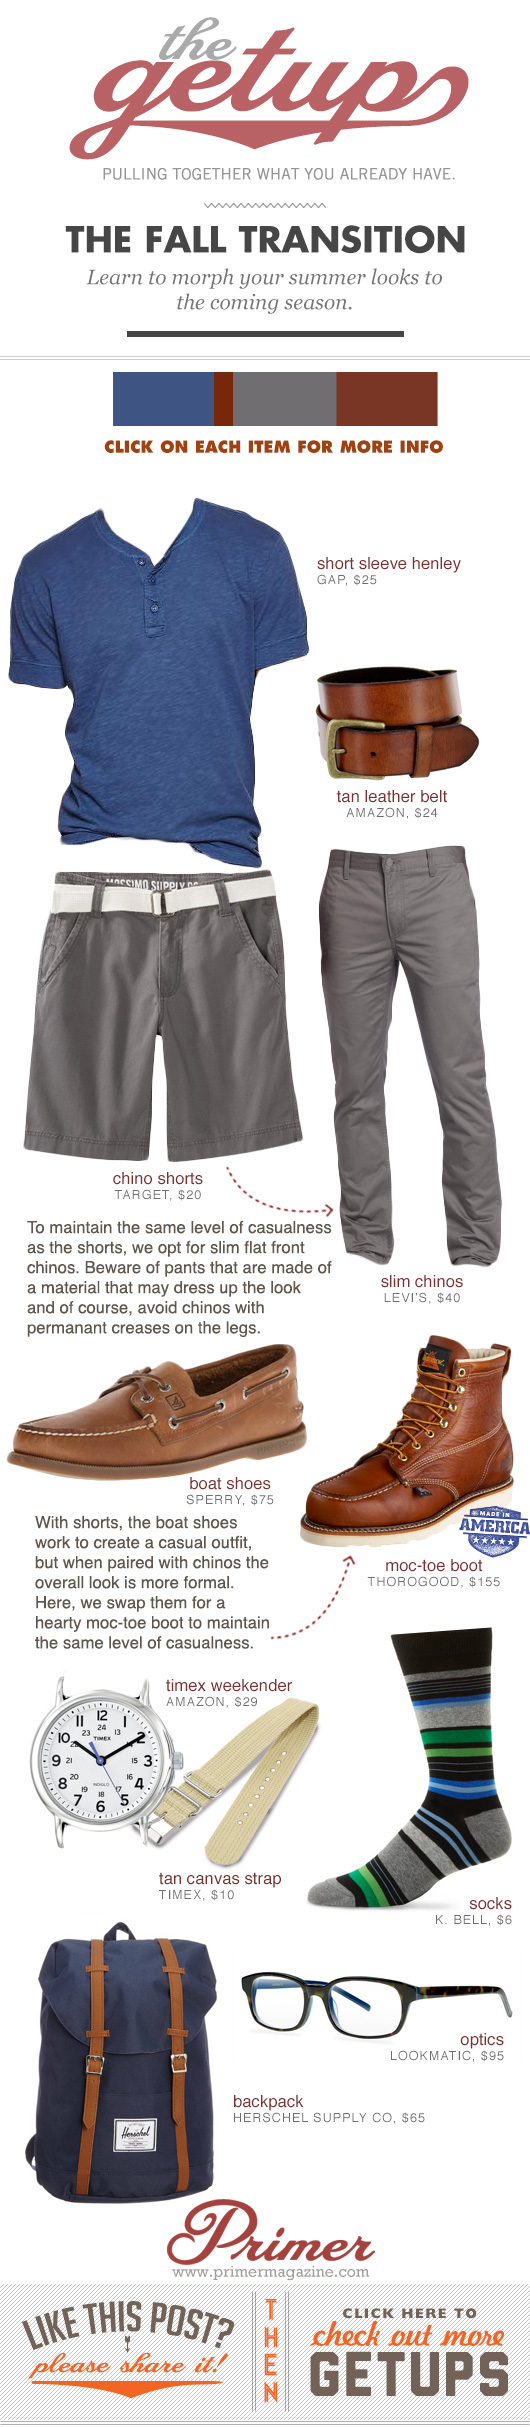 Fall Transition Getup - blue henley, gray shorts or pants, boat shoes or boots